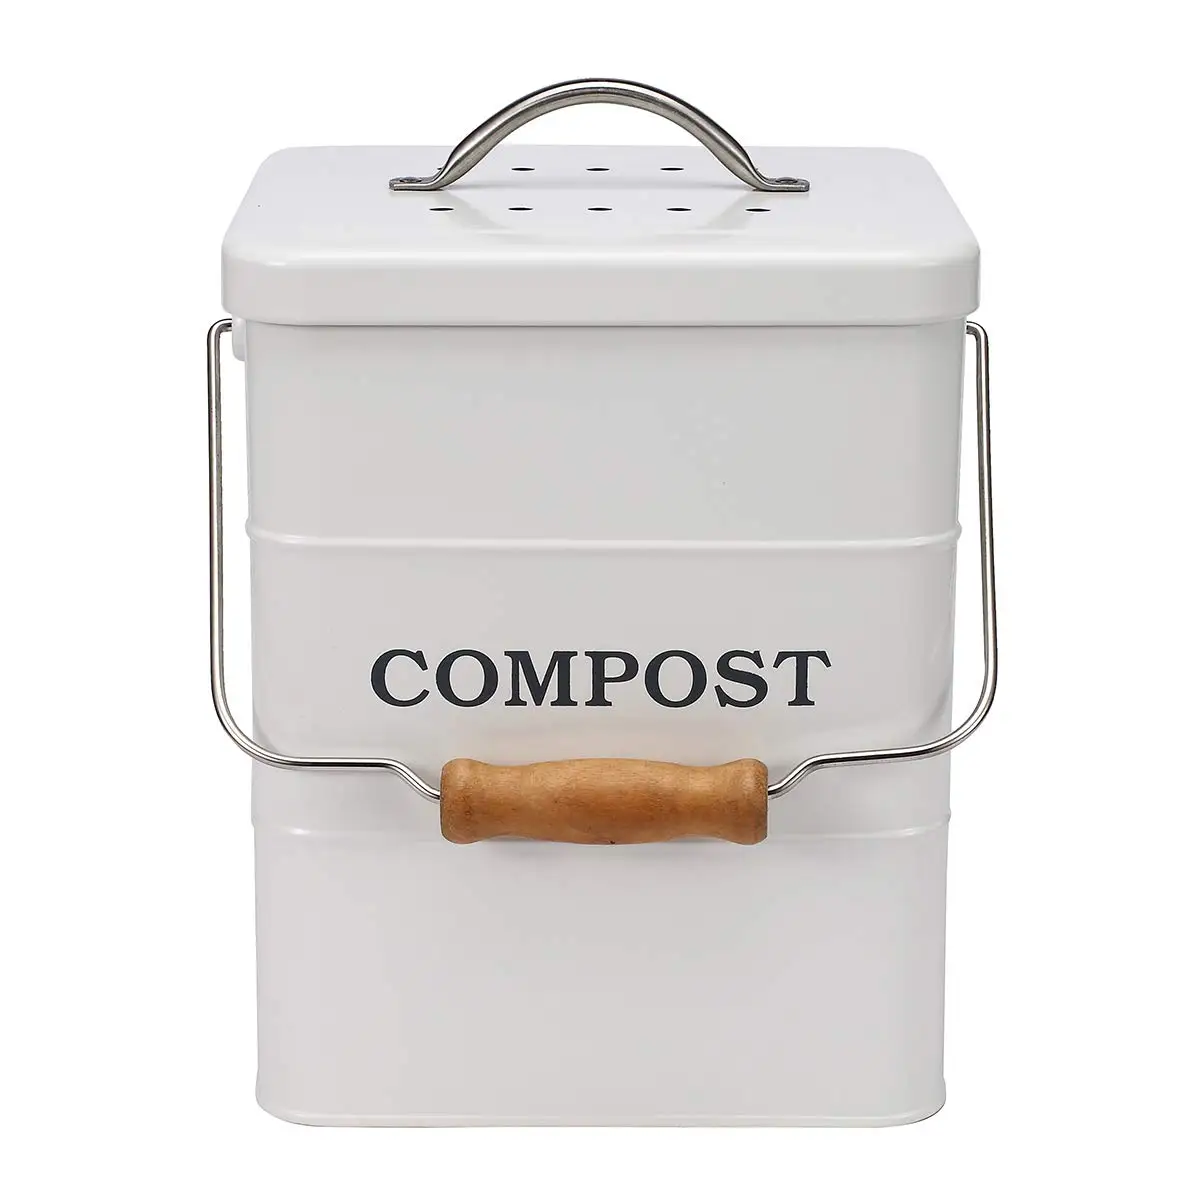 food waste compost caninster metal bin with handle